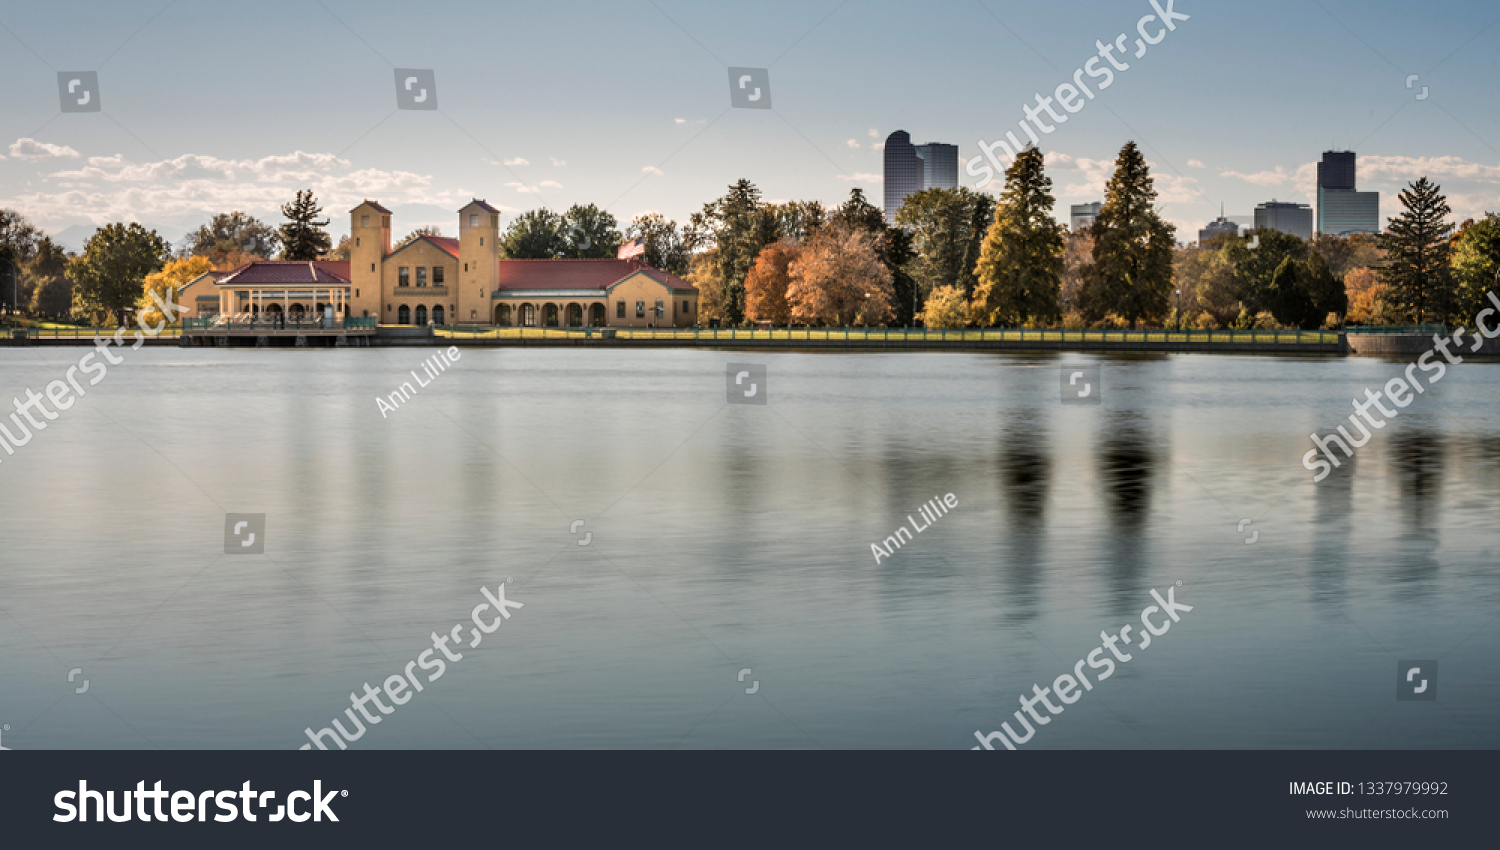 A beautiful panorama of City Park in Denver, Colorado in late summer or autumn. The brick boathouse and a row of trees changing color are reflected in the smooth, blue, peaceful water of the pond. #1337979992